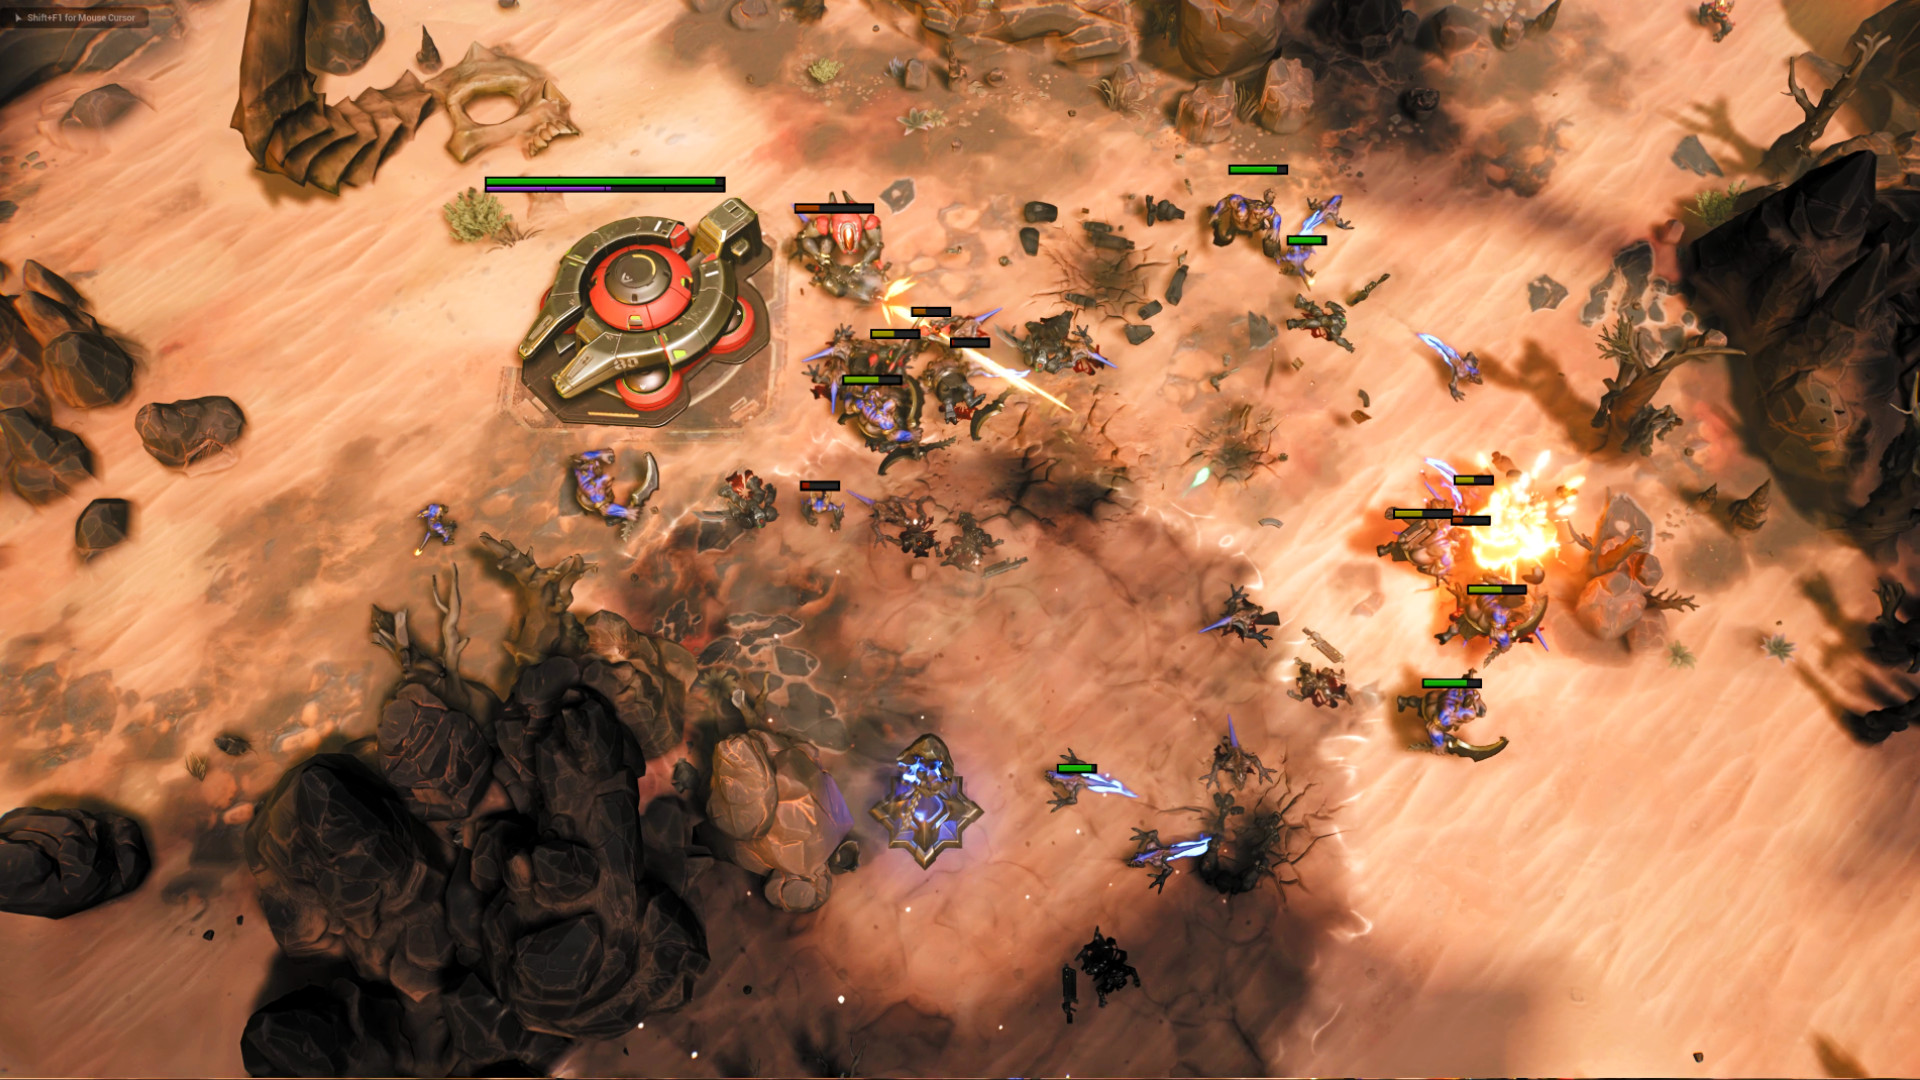 Stormgate devs want to build the Marvel of RTS games